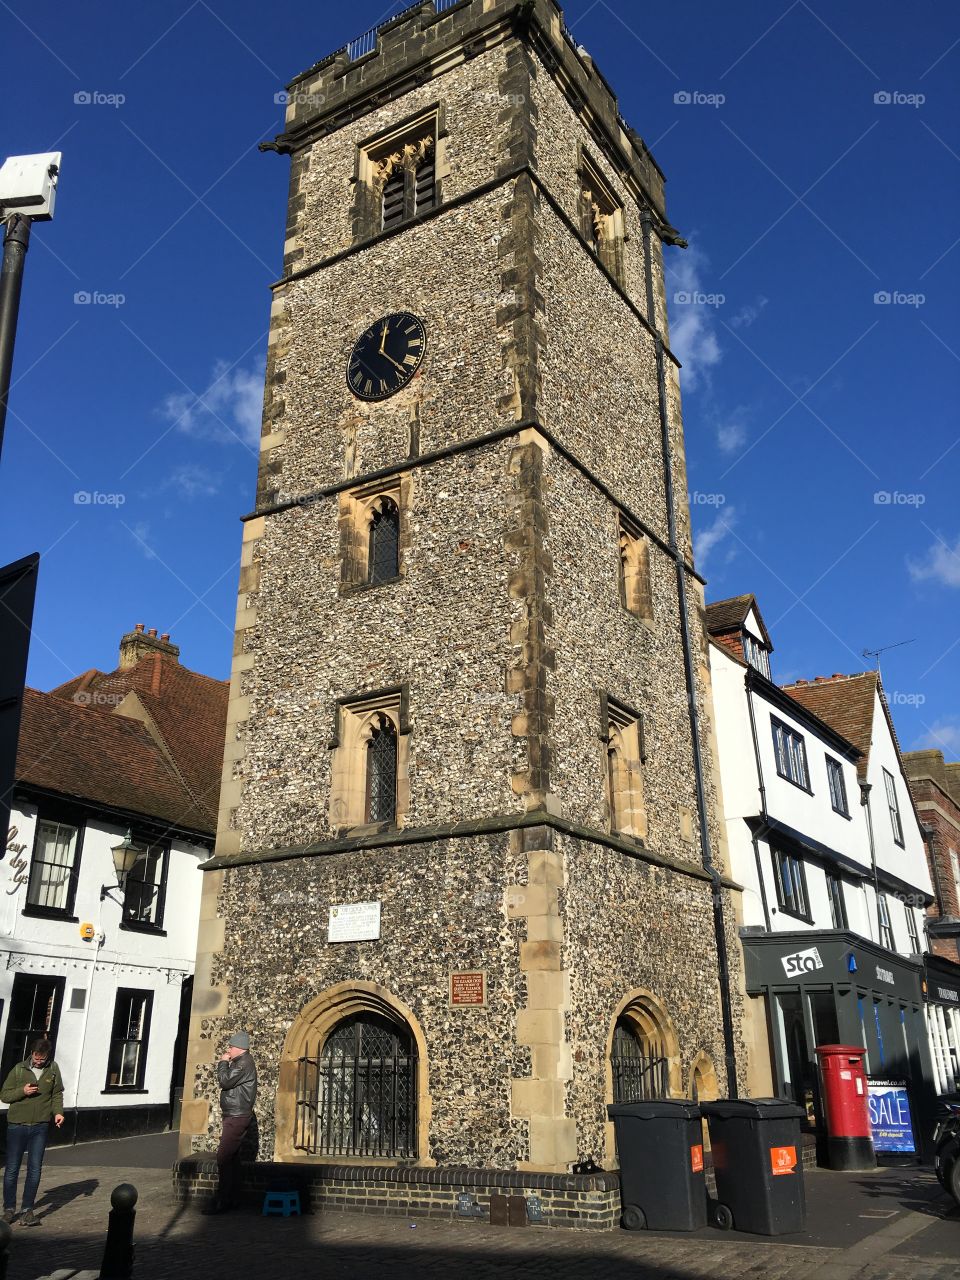 St Albans clock tower 